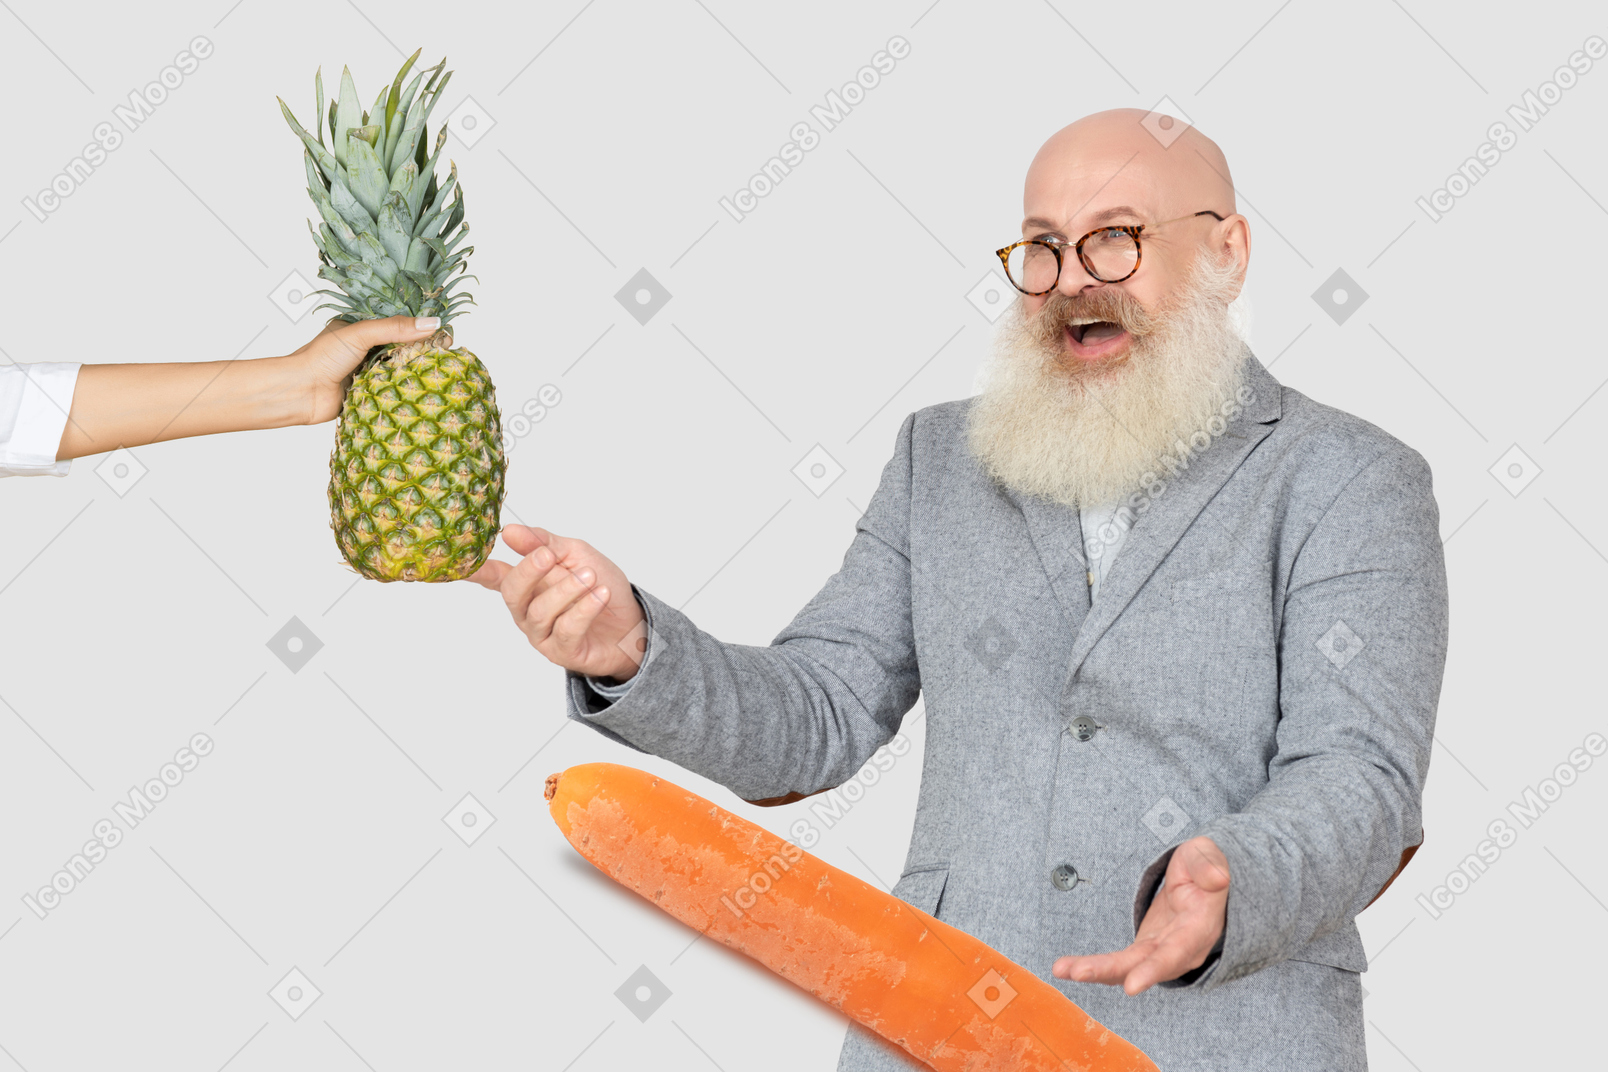 Man holding a carrot in his hand